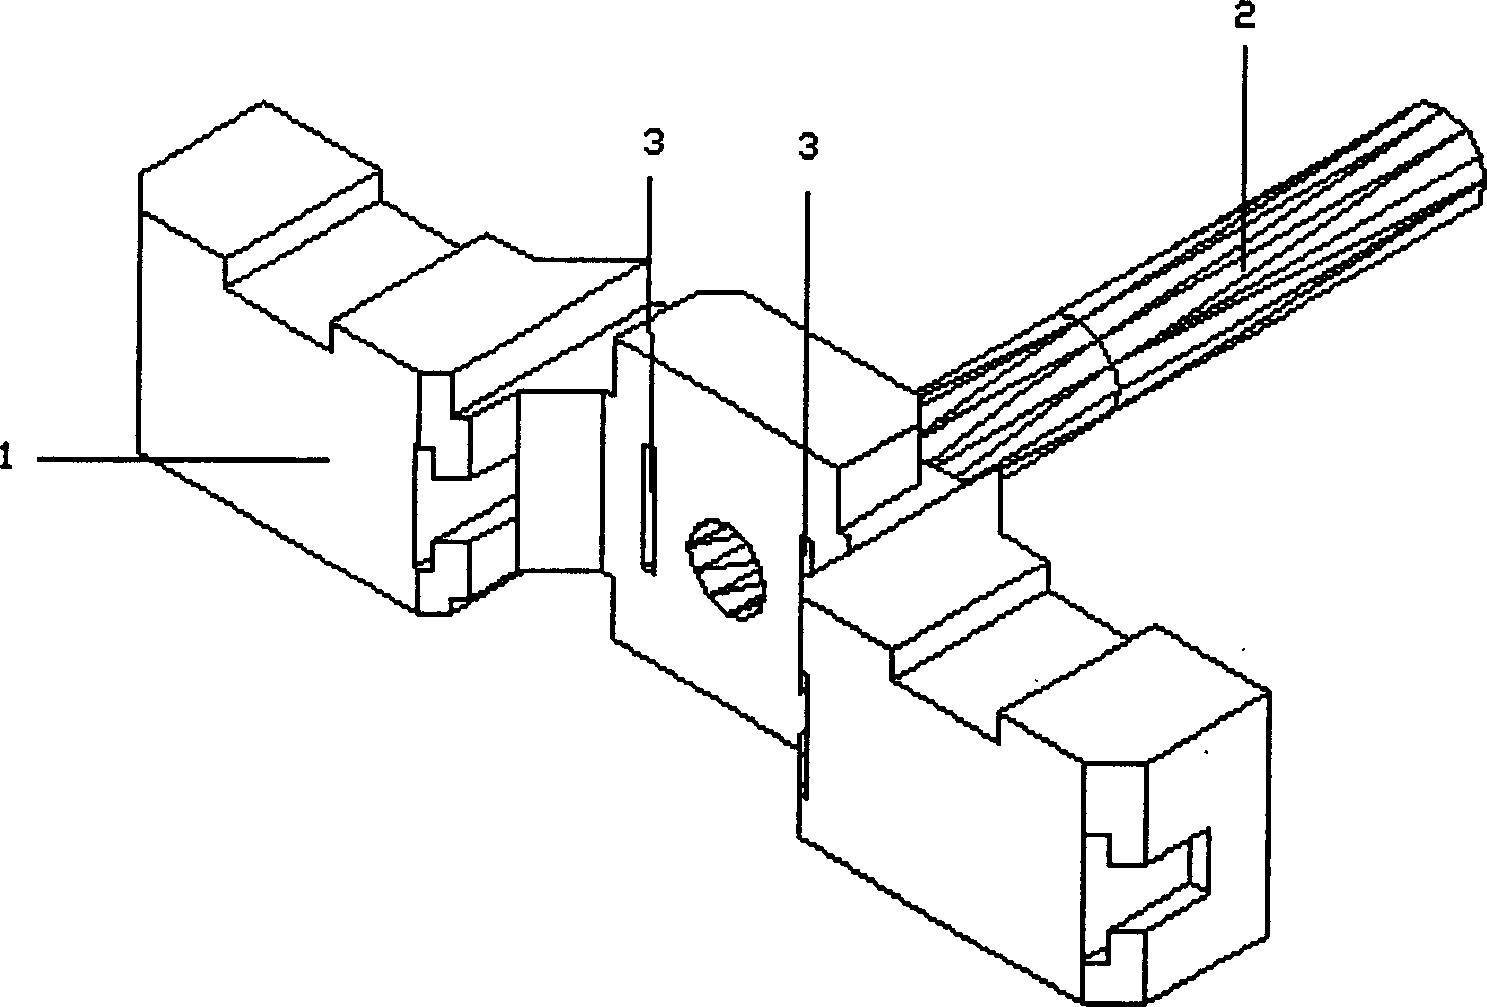 Balancing stand with slot having movable contact piece for resetting